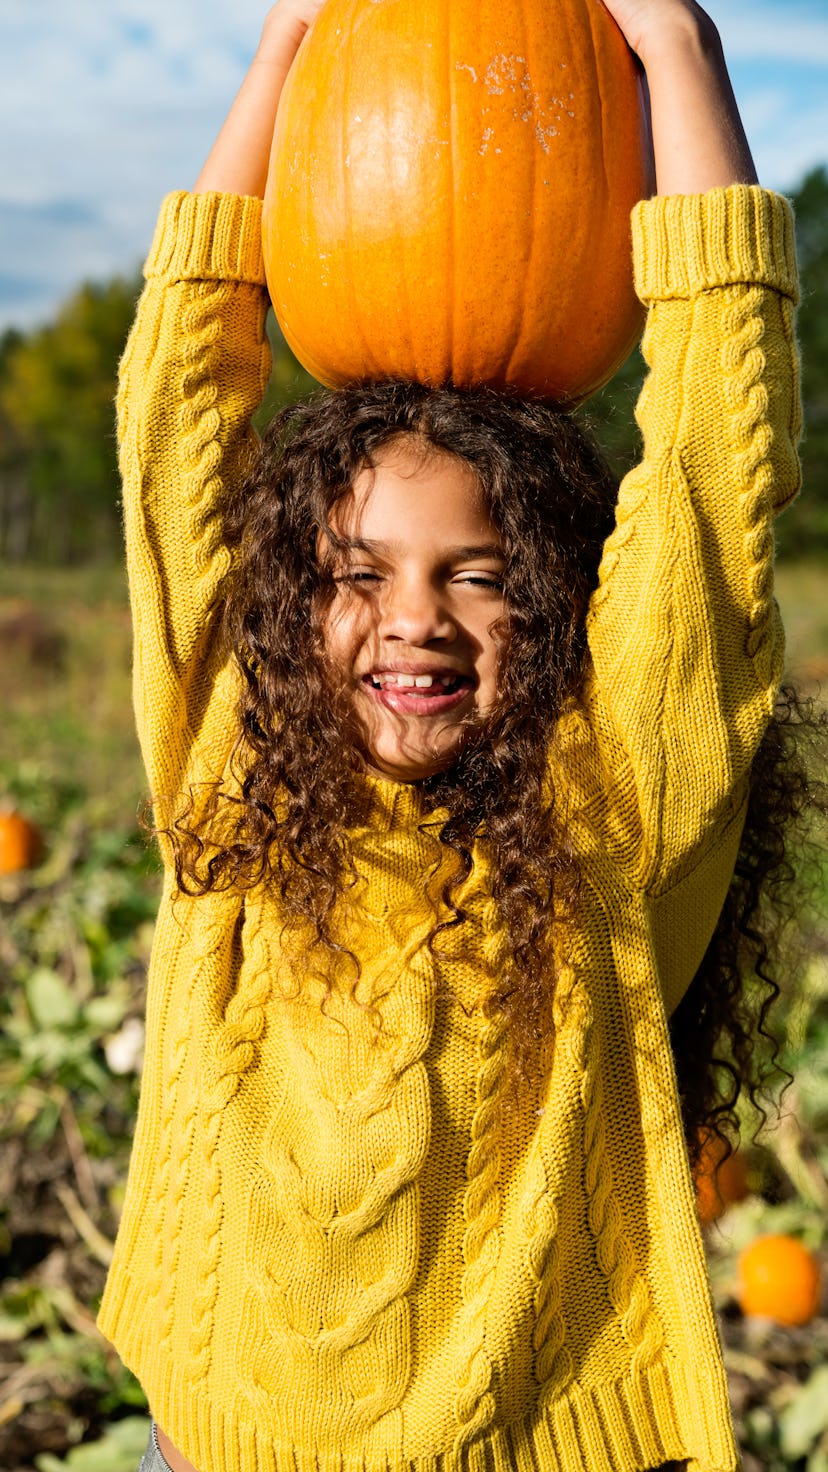 A girl with long dark hair wearing a yellow sweater holds a pumpkin above her head and smiles at one...